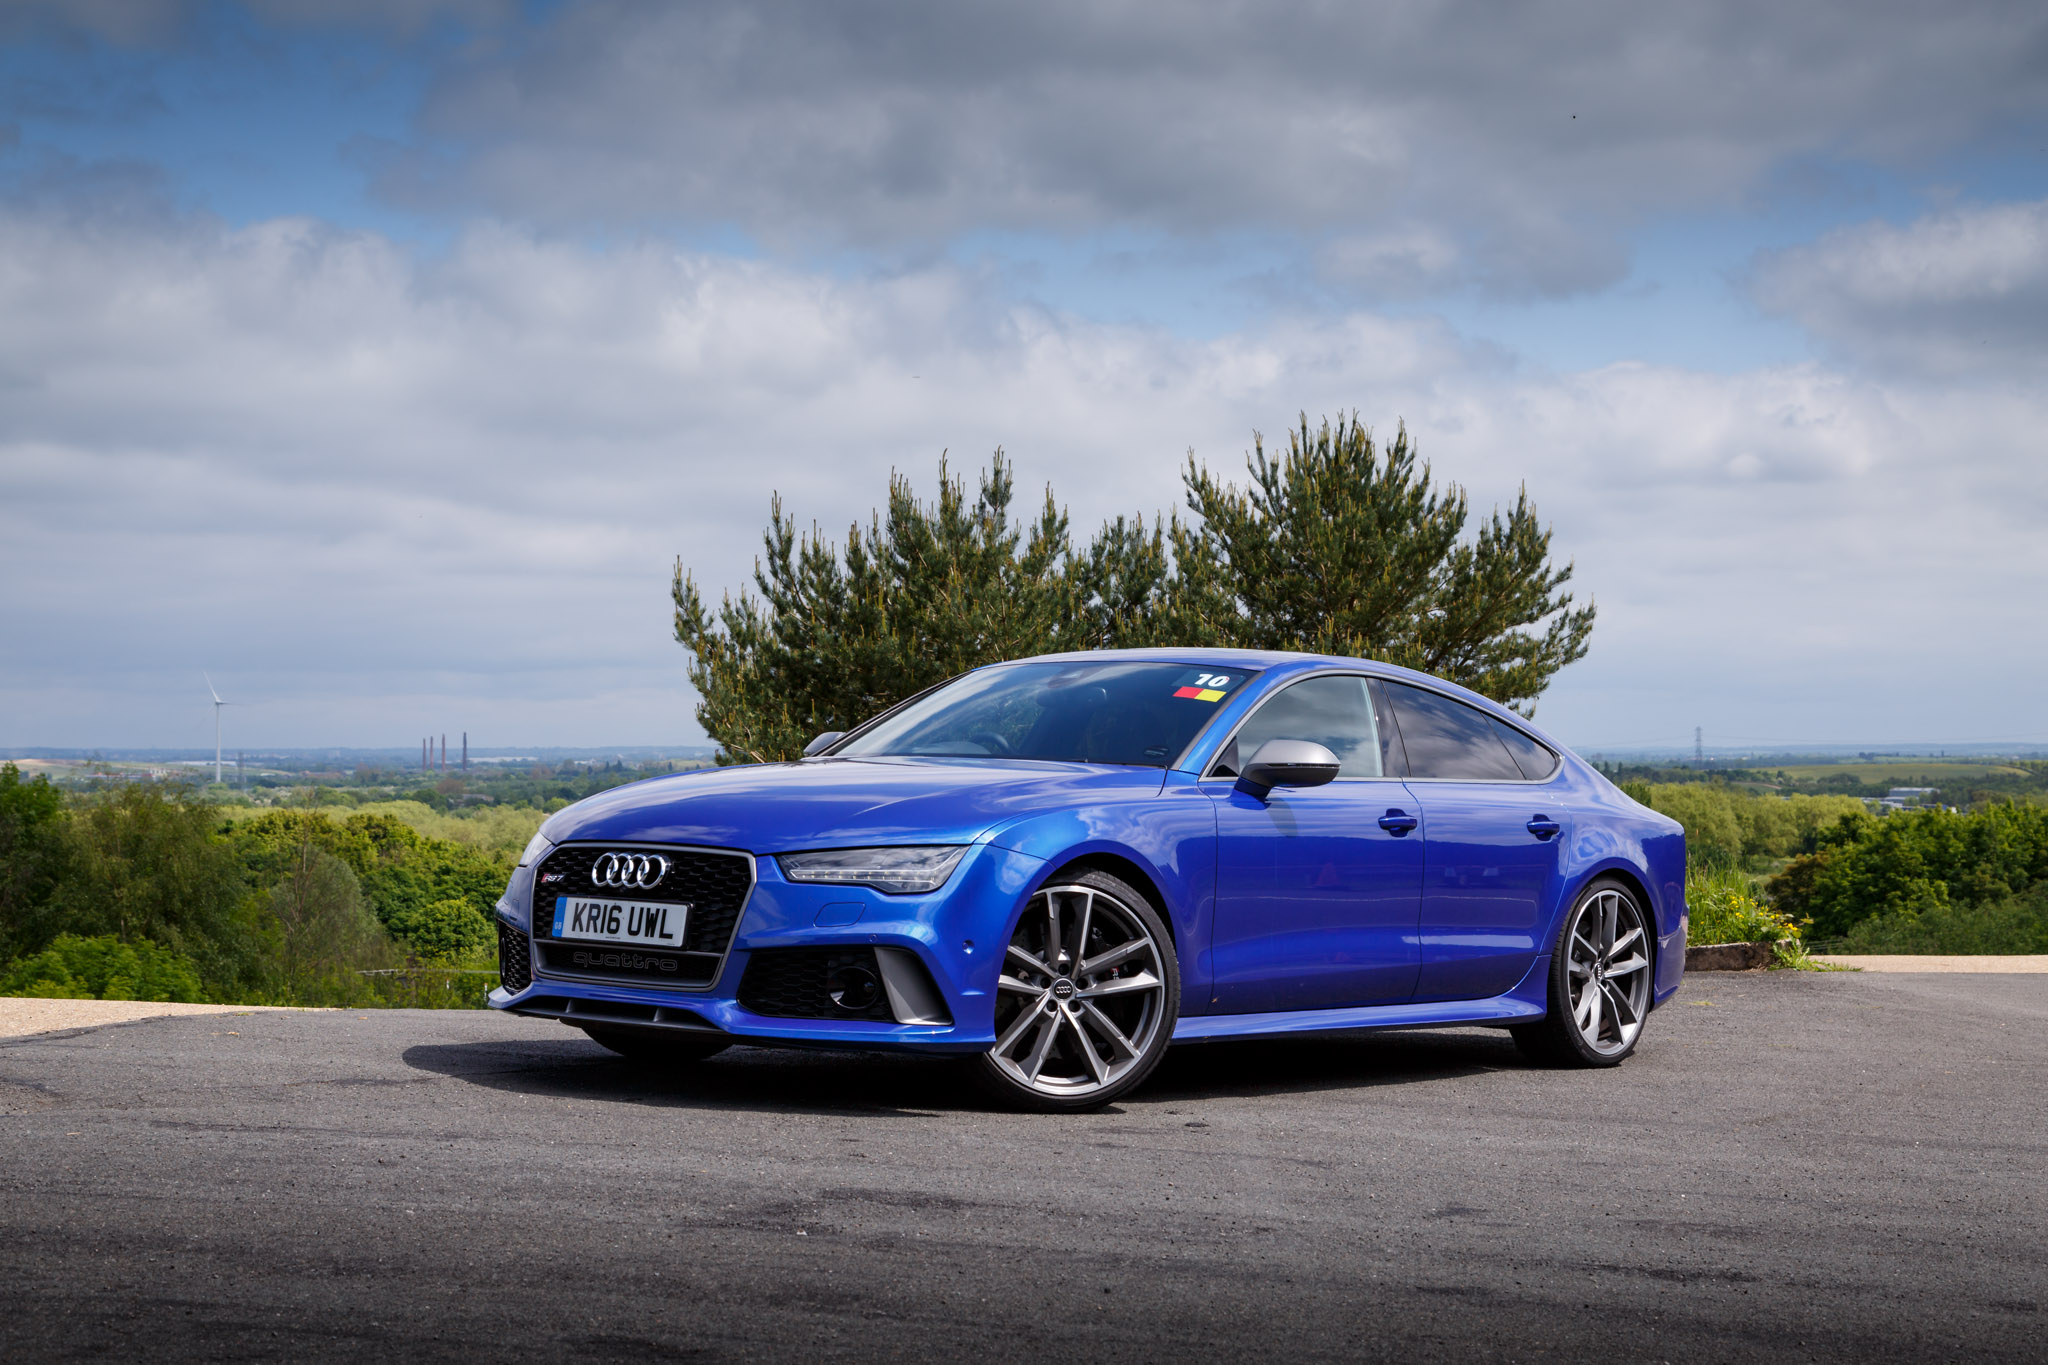 2016 Audi RS7 Sportback Review - The Best Sounding Audi ...